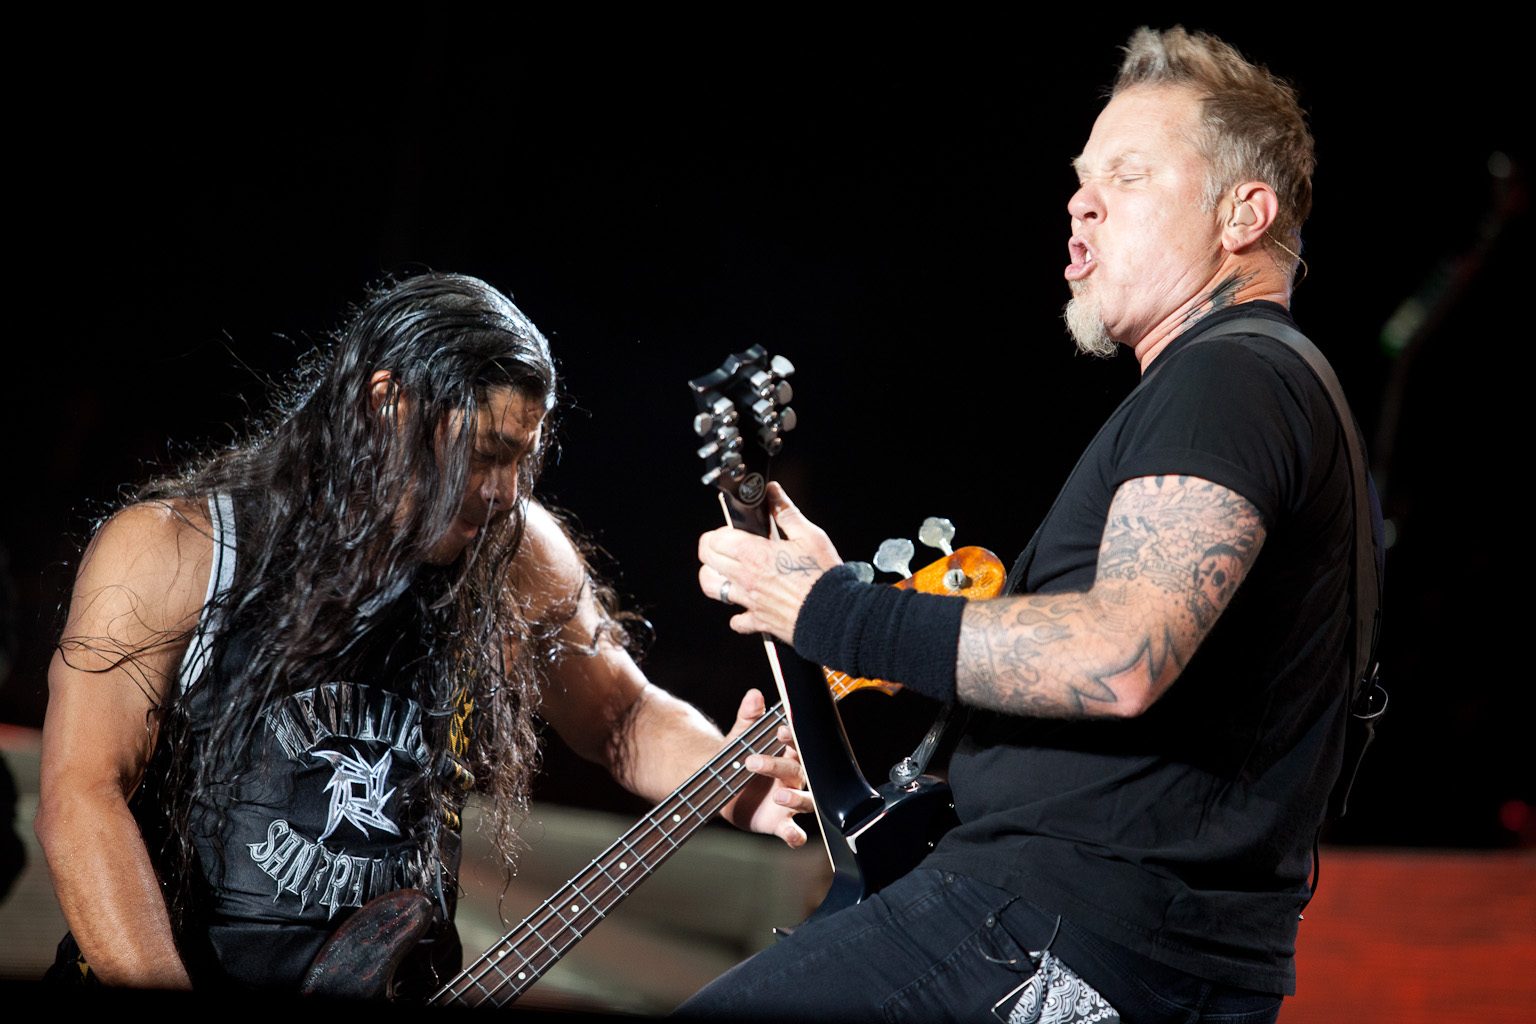 Sonic Temple Announces 2020 Lineup Featuring Two Nights of Metallica, Slipknot and Evanescence